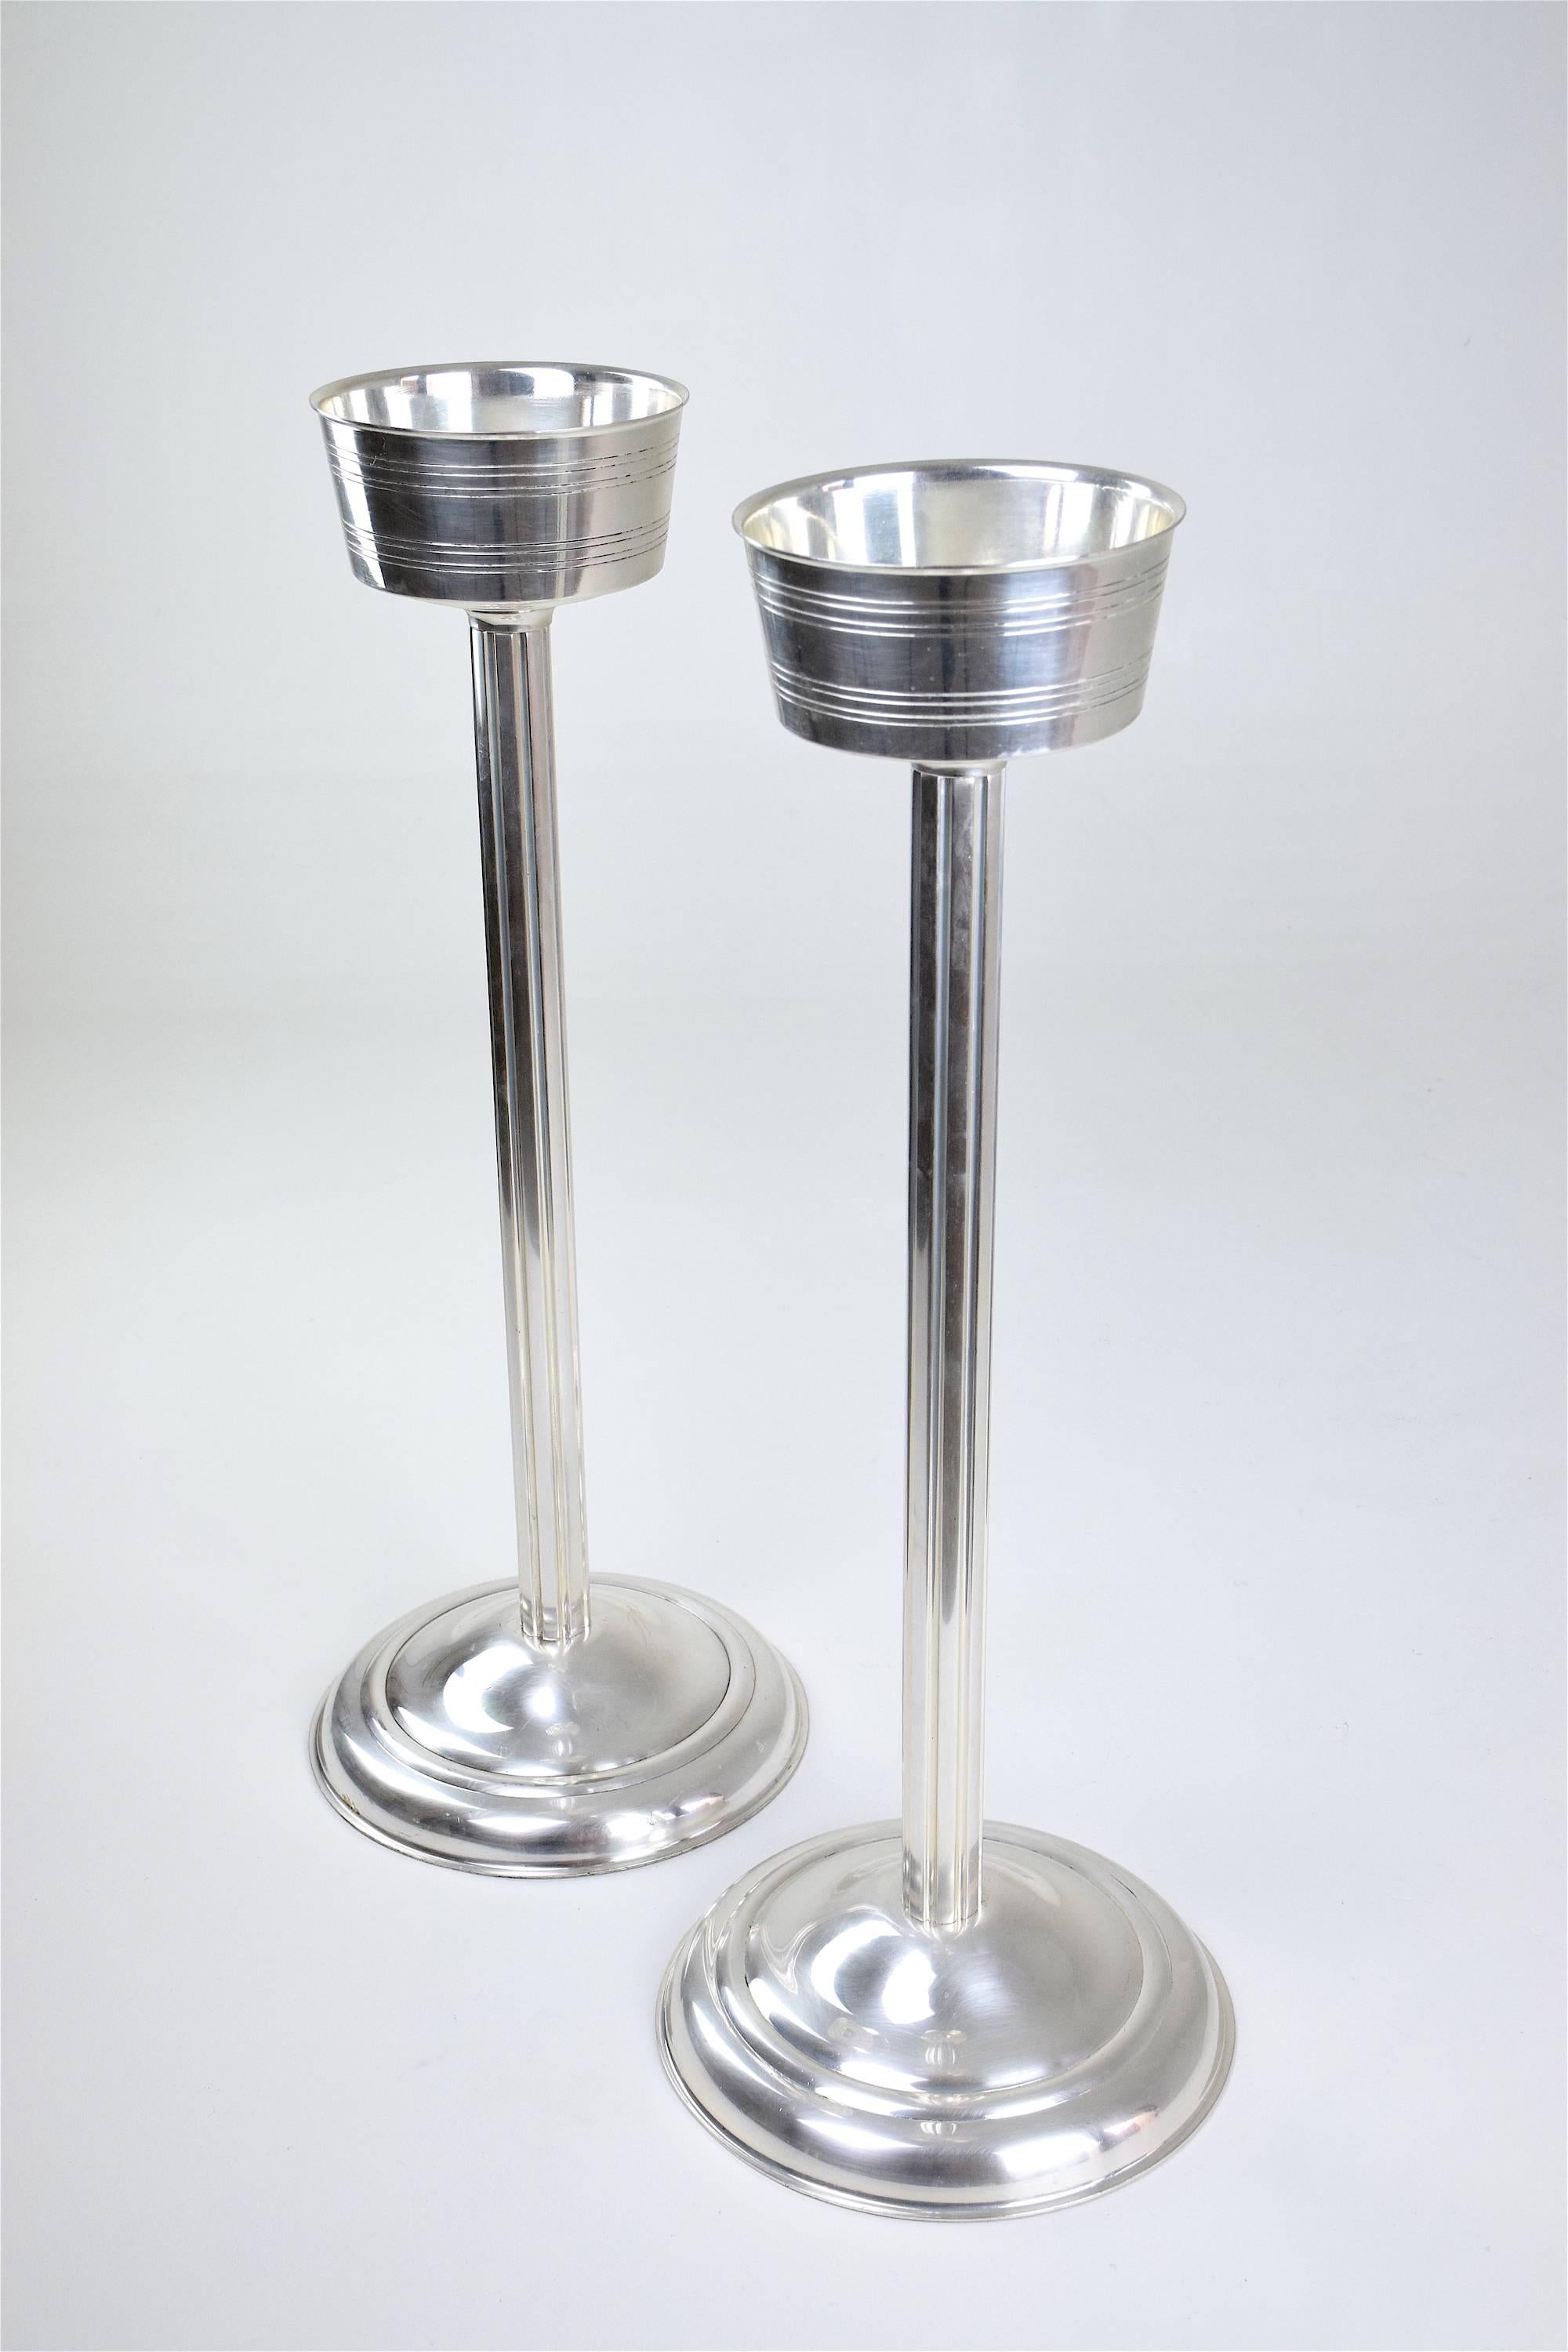 Pair of heavy silver plated solid brass stands for champagne buckets, wine coolers or even ice coolers in Art Deco style. 
Surfaces have been professionally refinished. 
These could be found in luxurious hotels and palaces. 
France. circa 1960s.